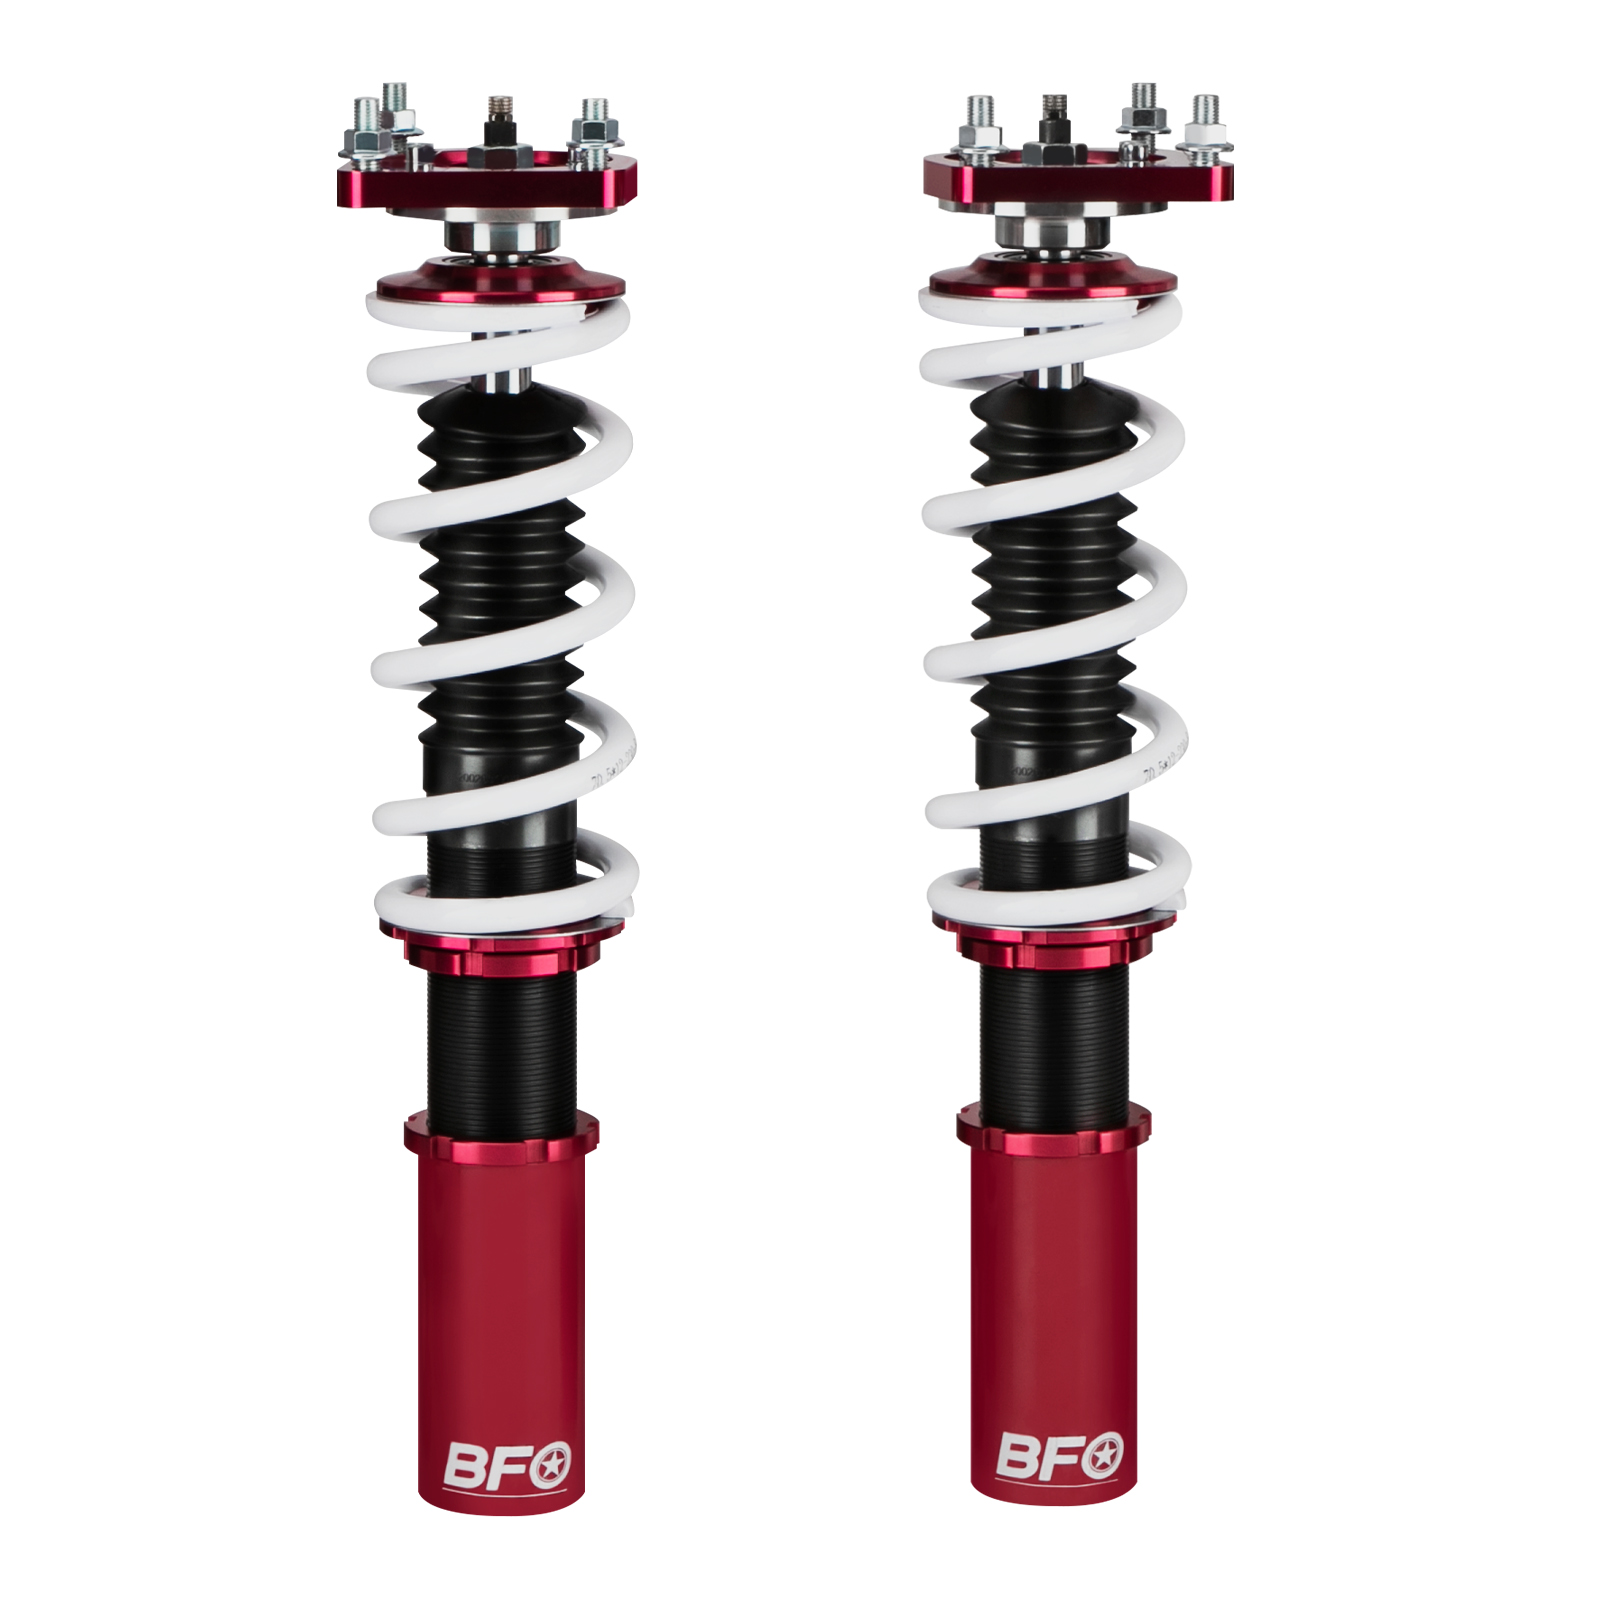 24 Click Damper Coilovers Suspension For Ford Mustang 1994-2004 Shocks Absorbers